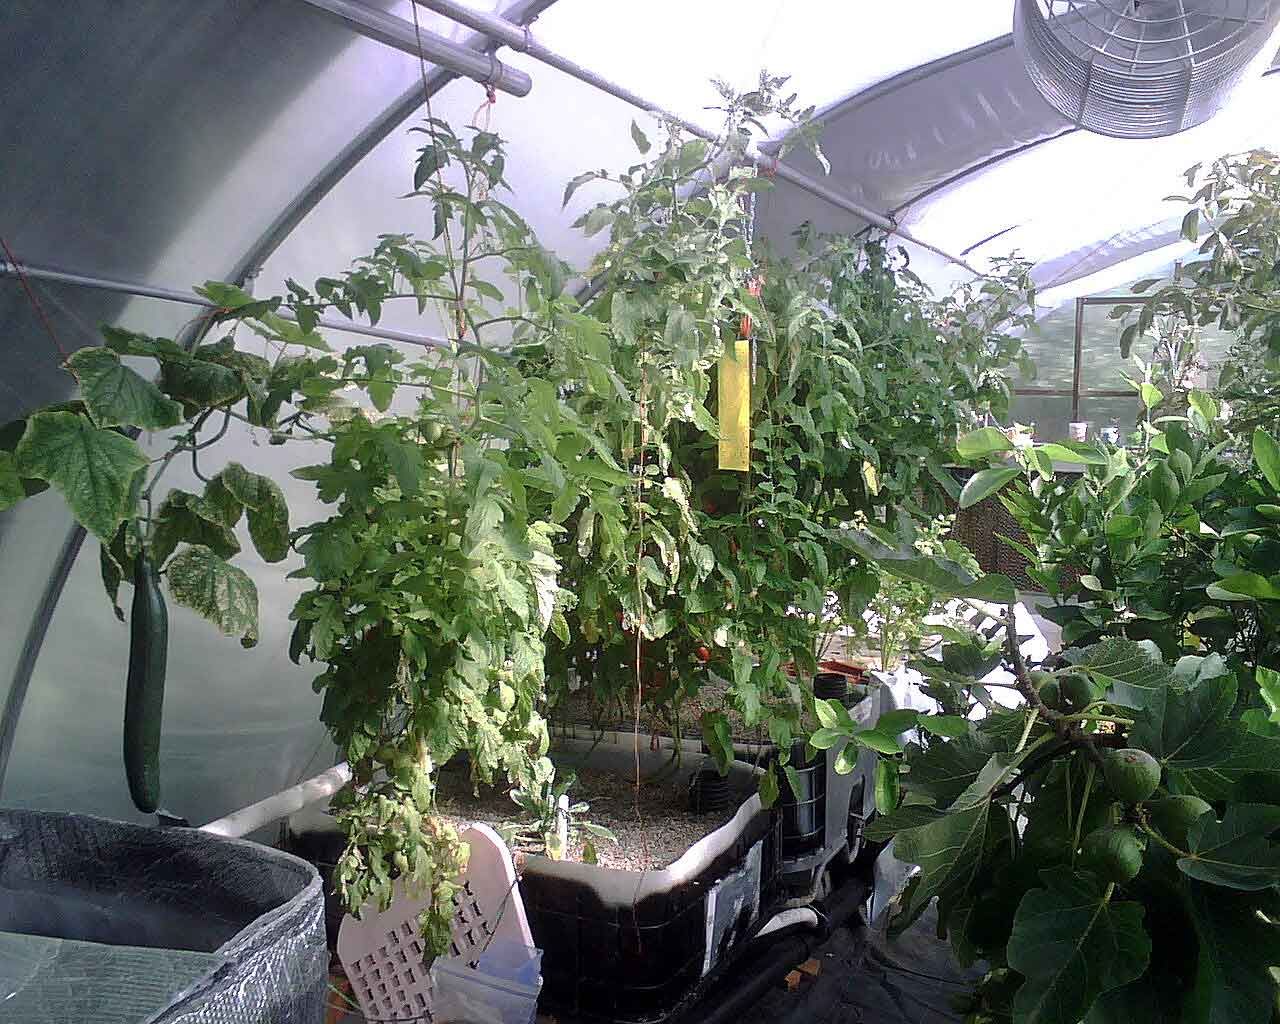  To Boost To Be The Expert Increaseer Aquaponics 4 You Is Effective